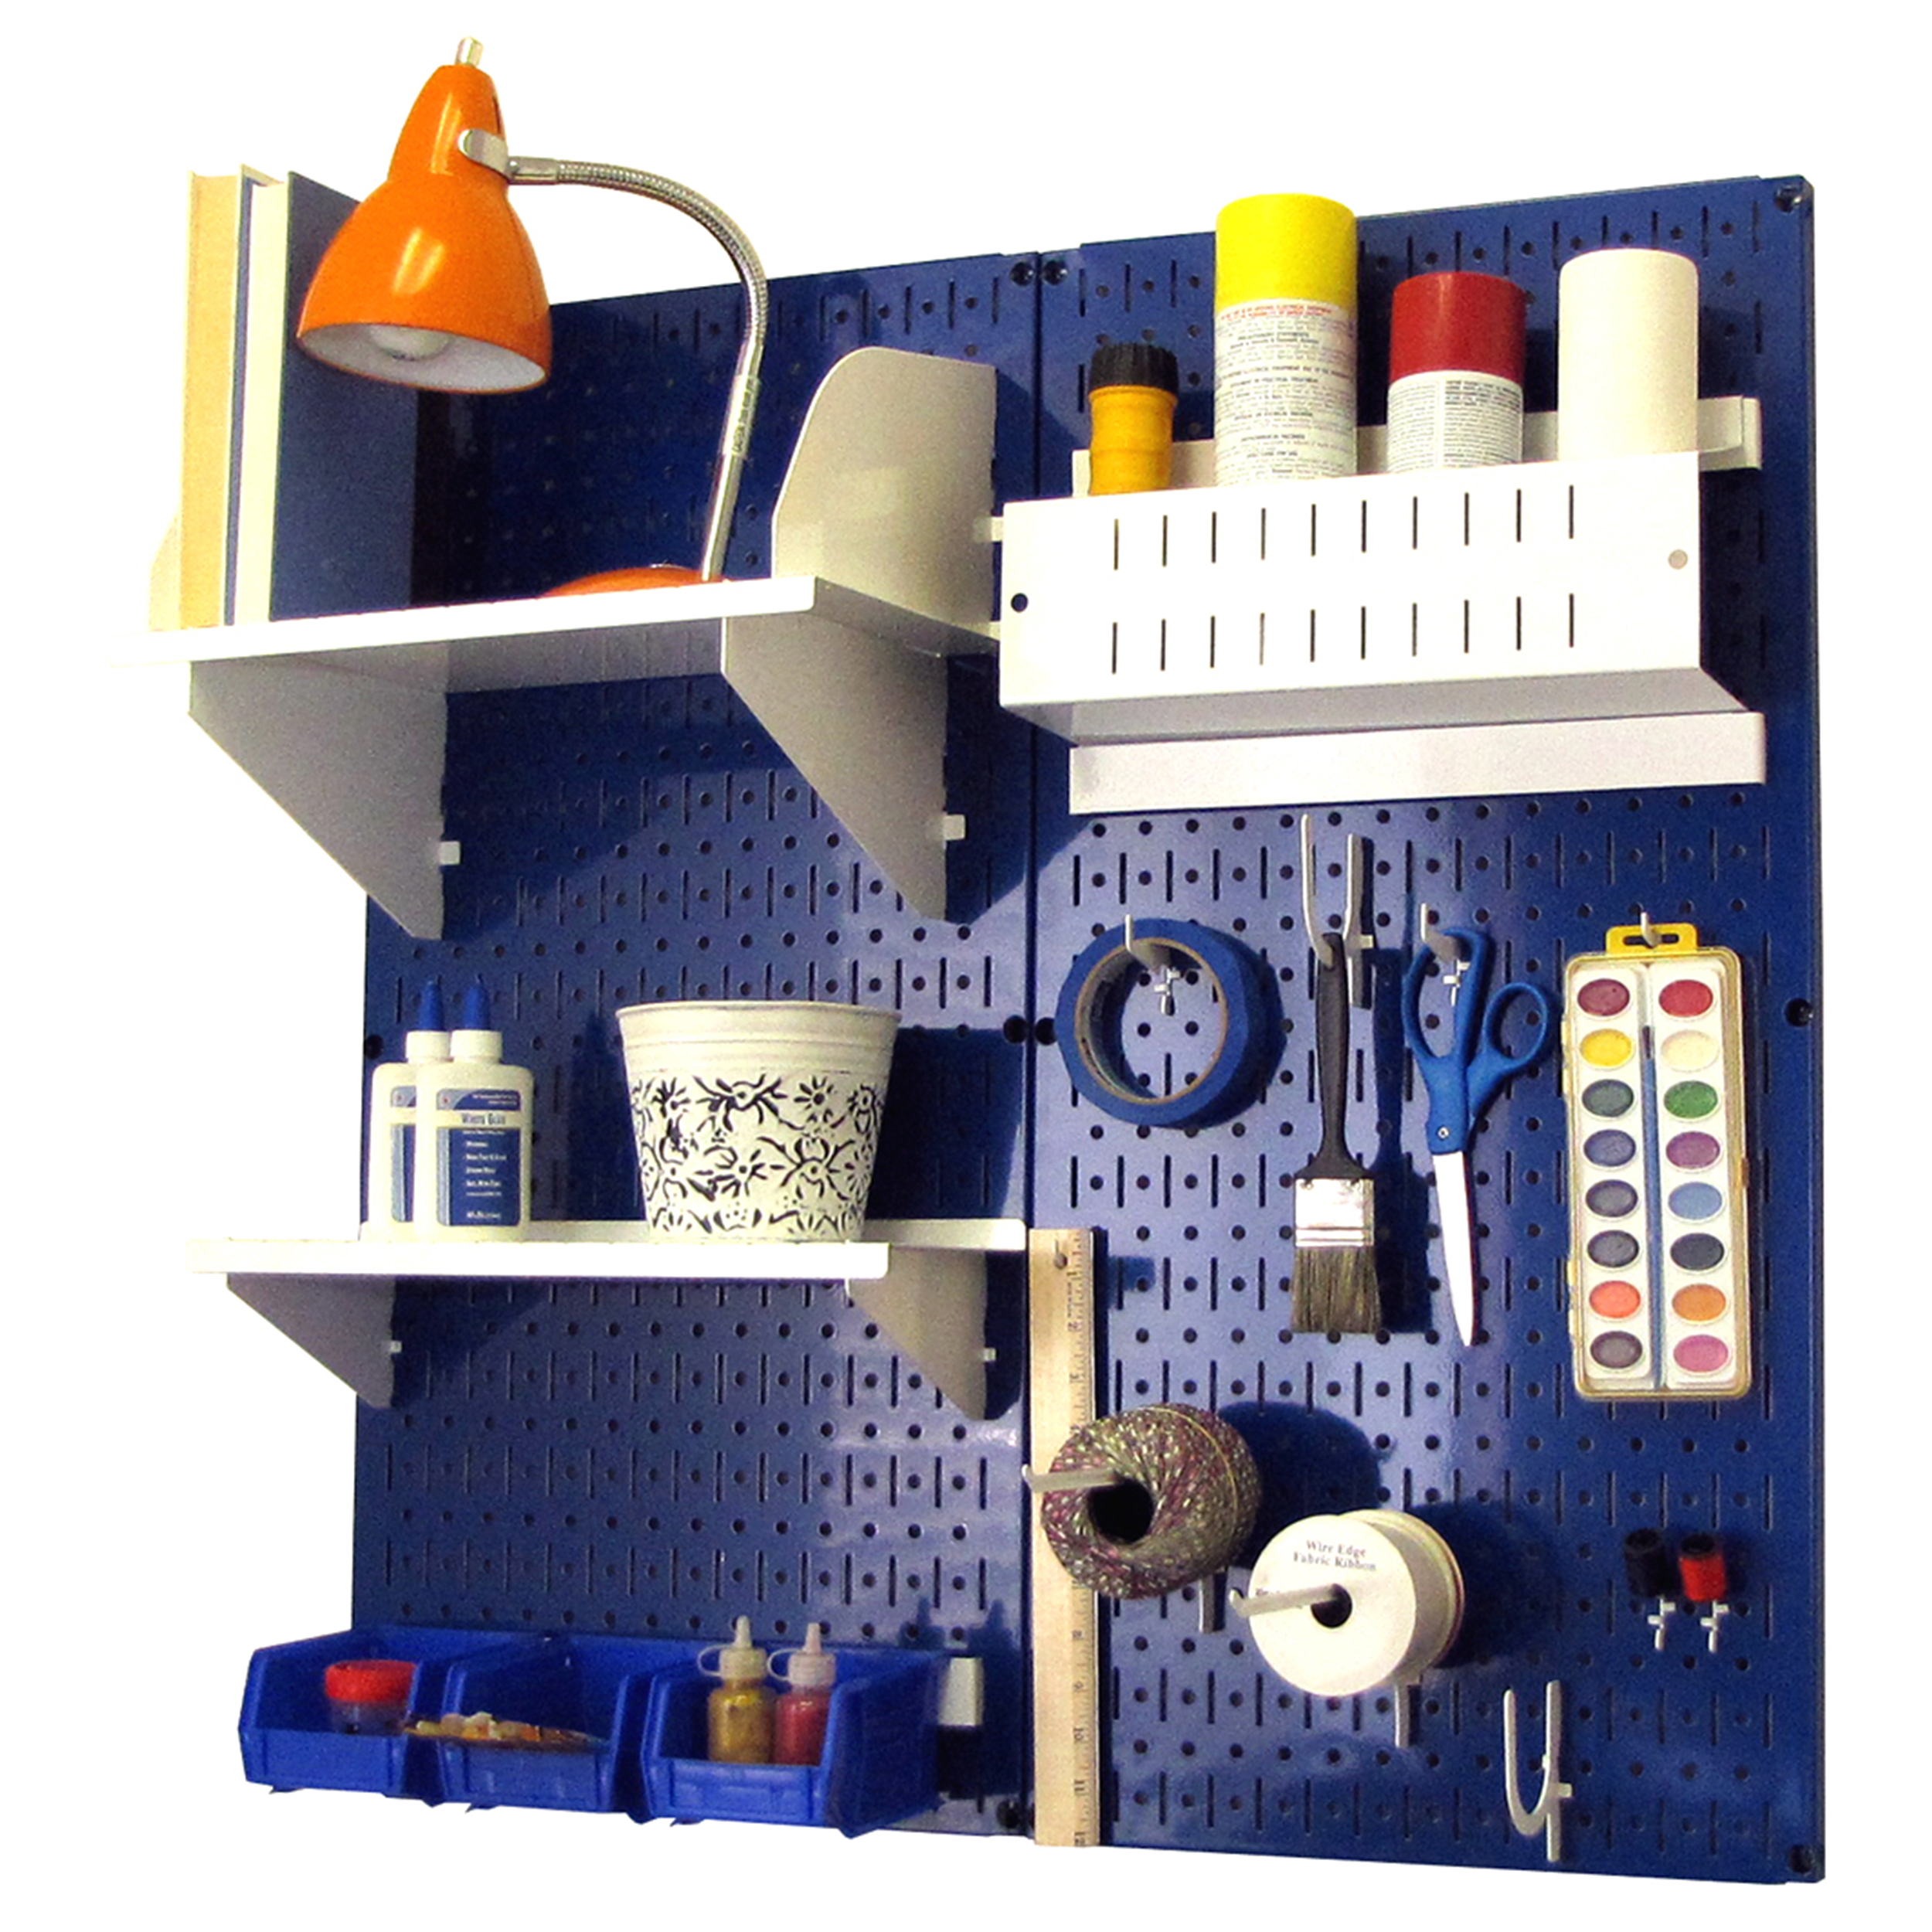 Pegboard Hobby Craft Pegboard Organizer Storage Kit With Blue Pegboard And White Accessories